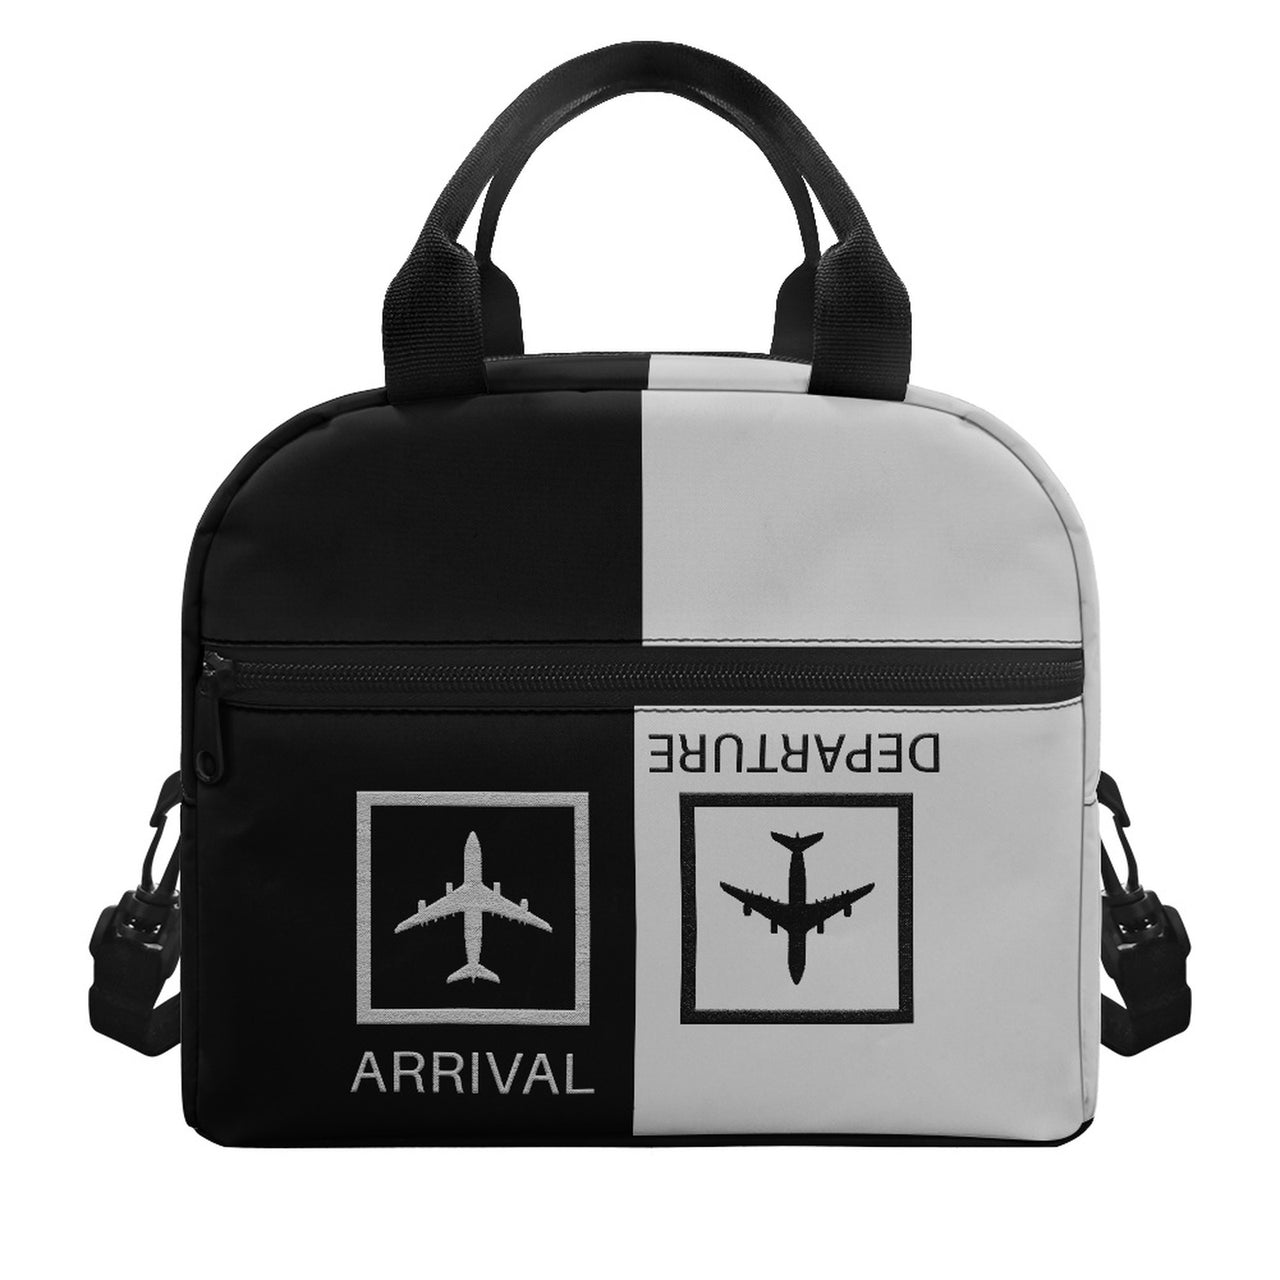 Arrival & Departures 2 Designed Lunch Bags